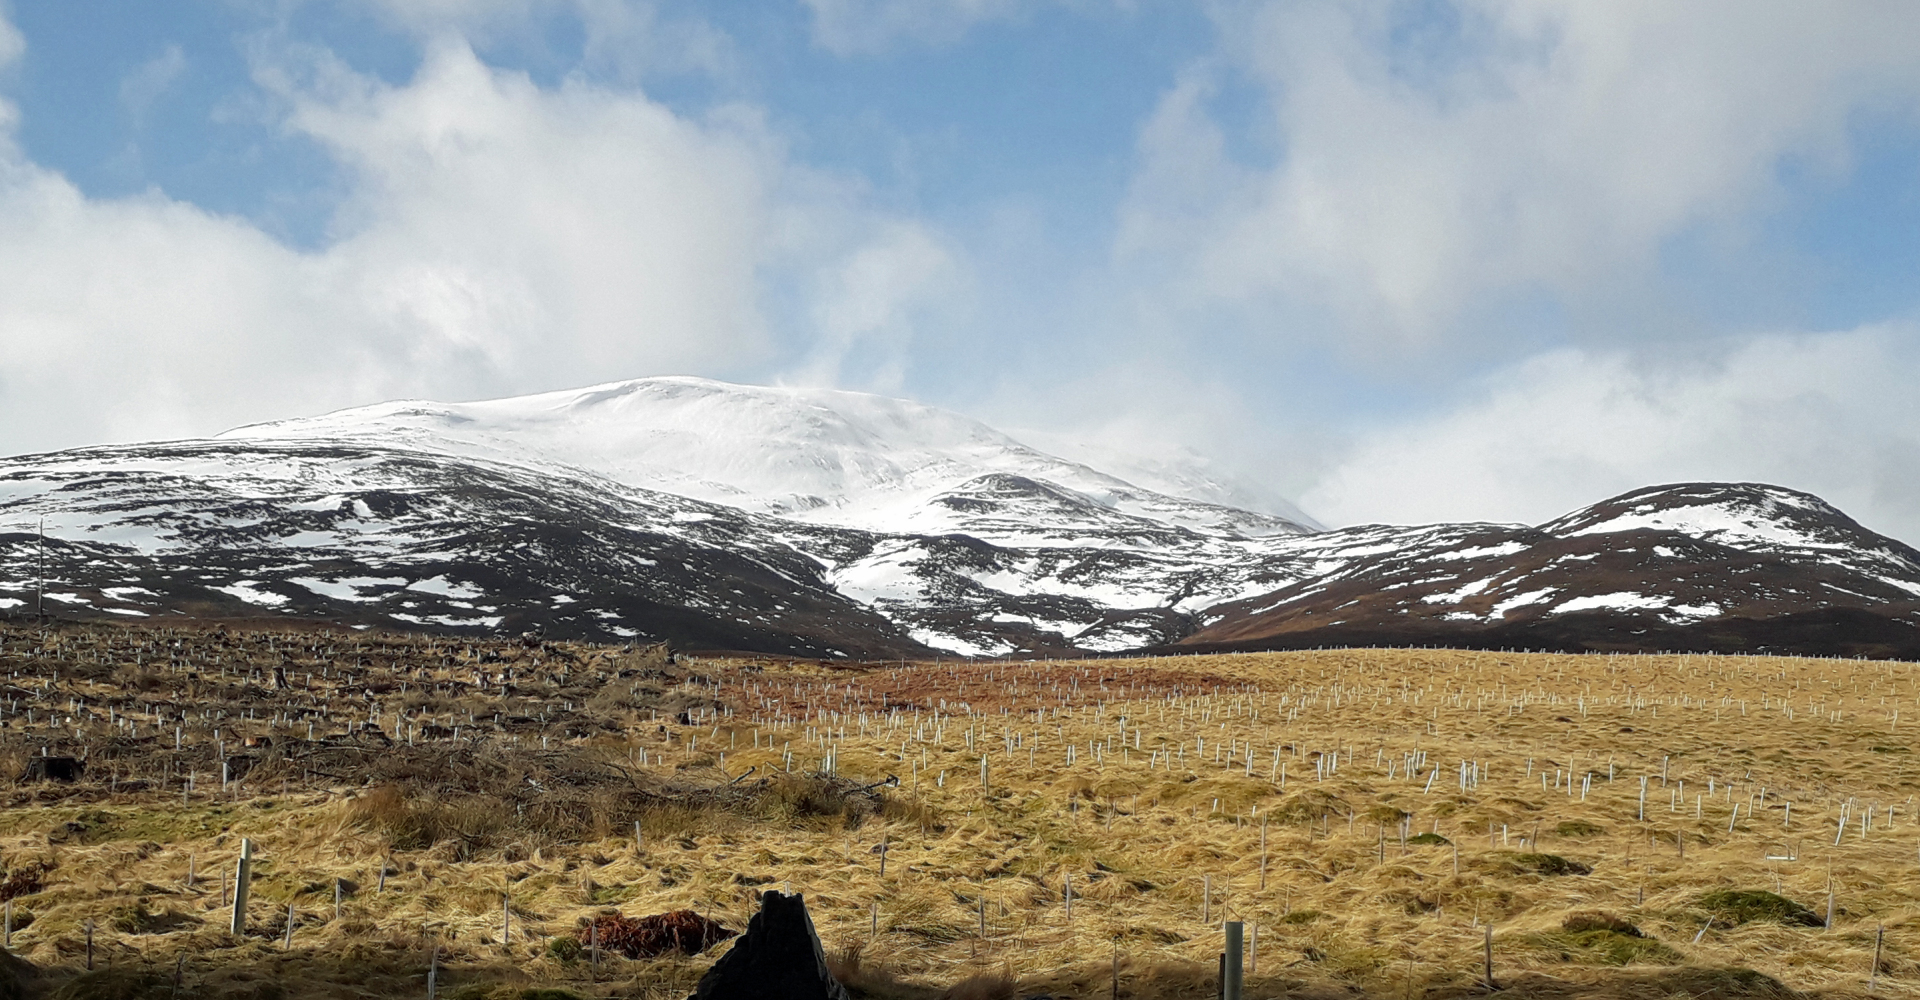 Schiehallion with snow and trees - March 2020